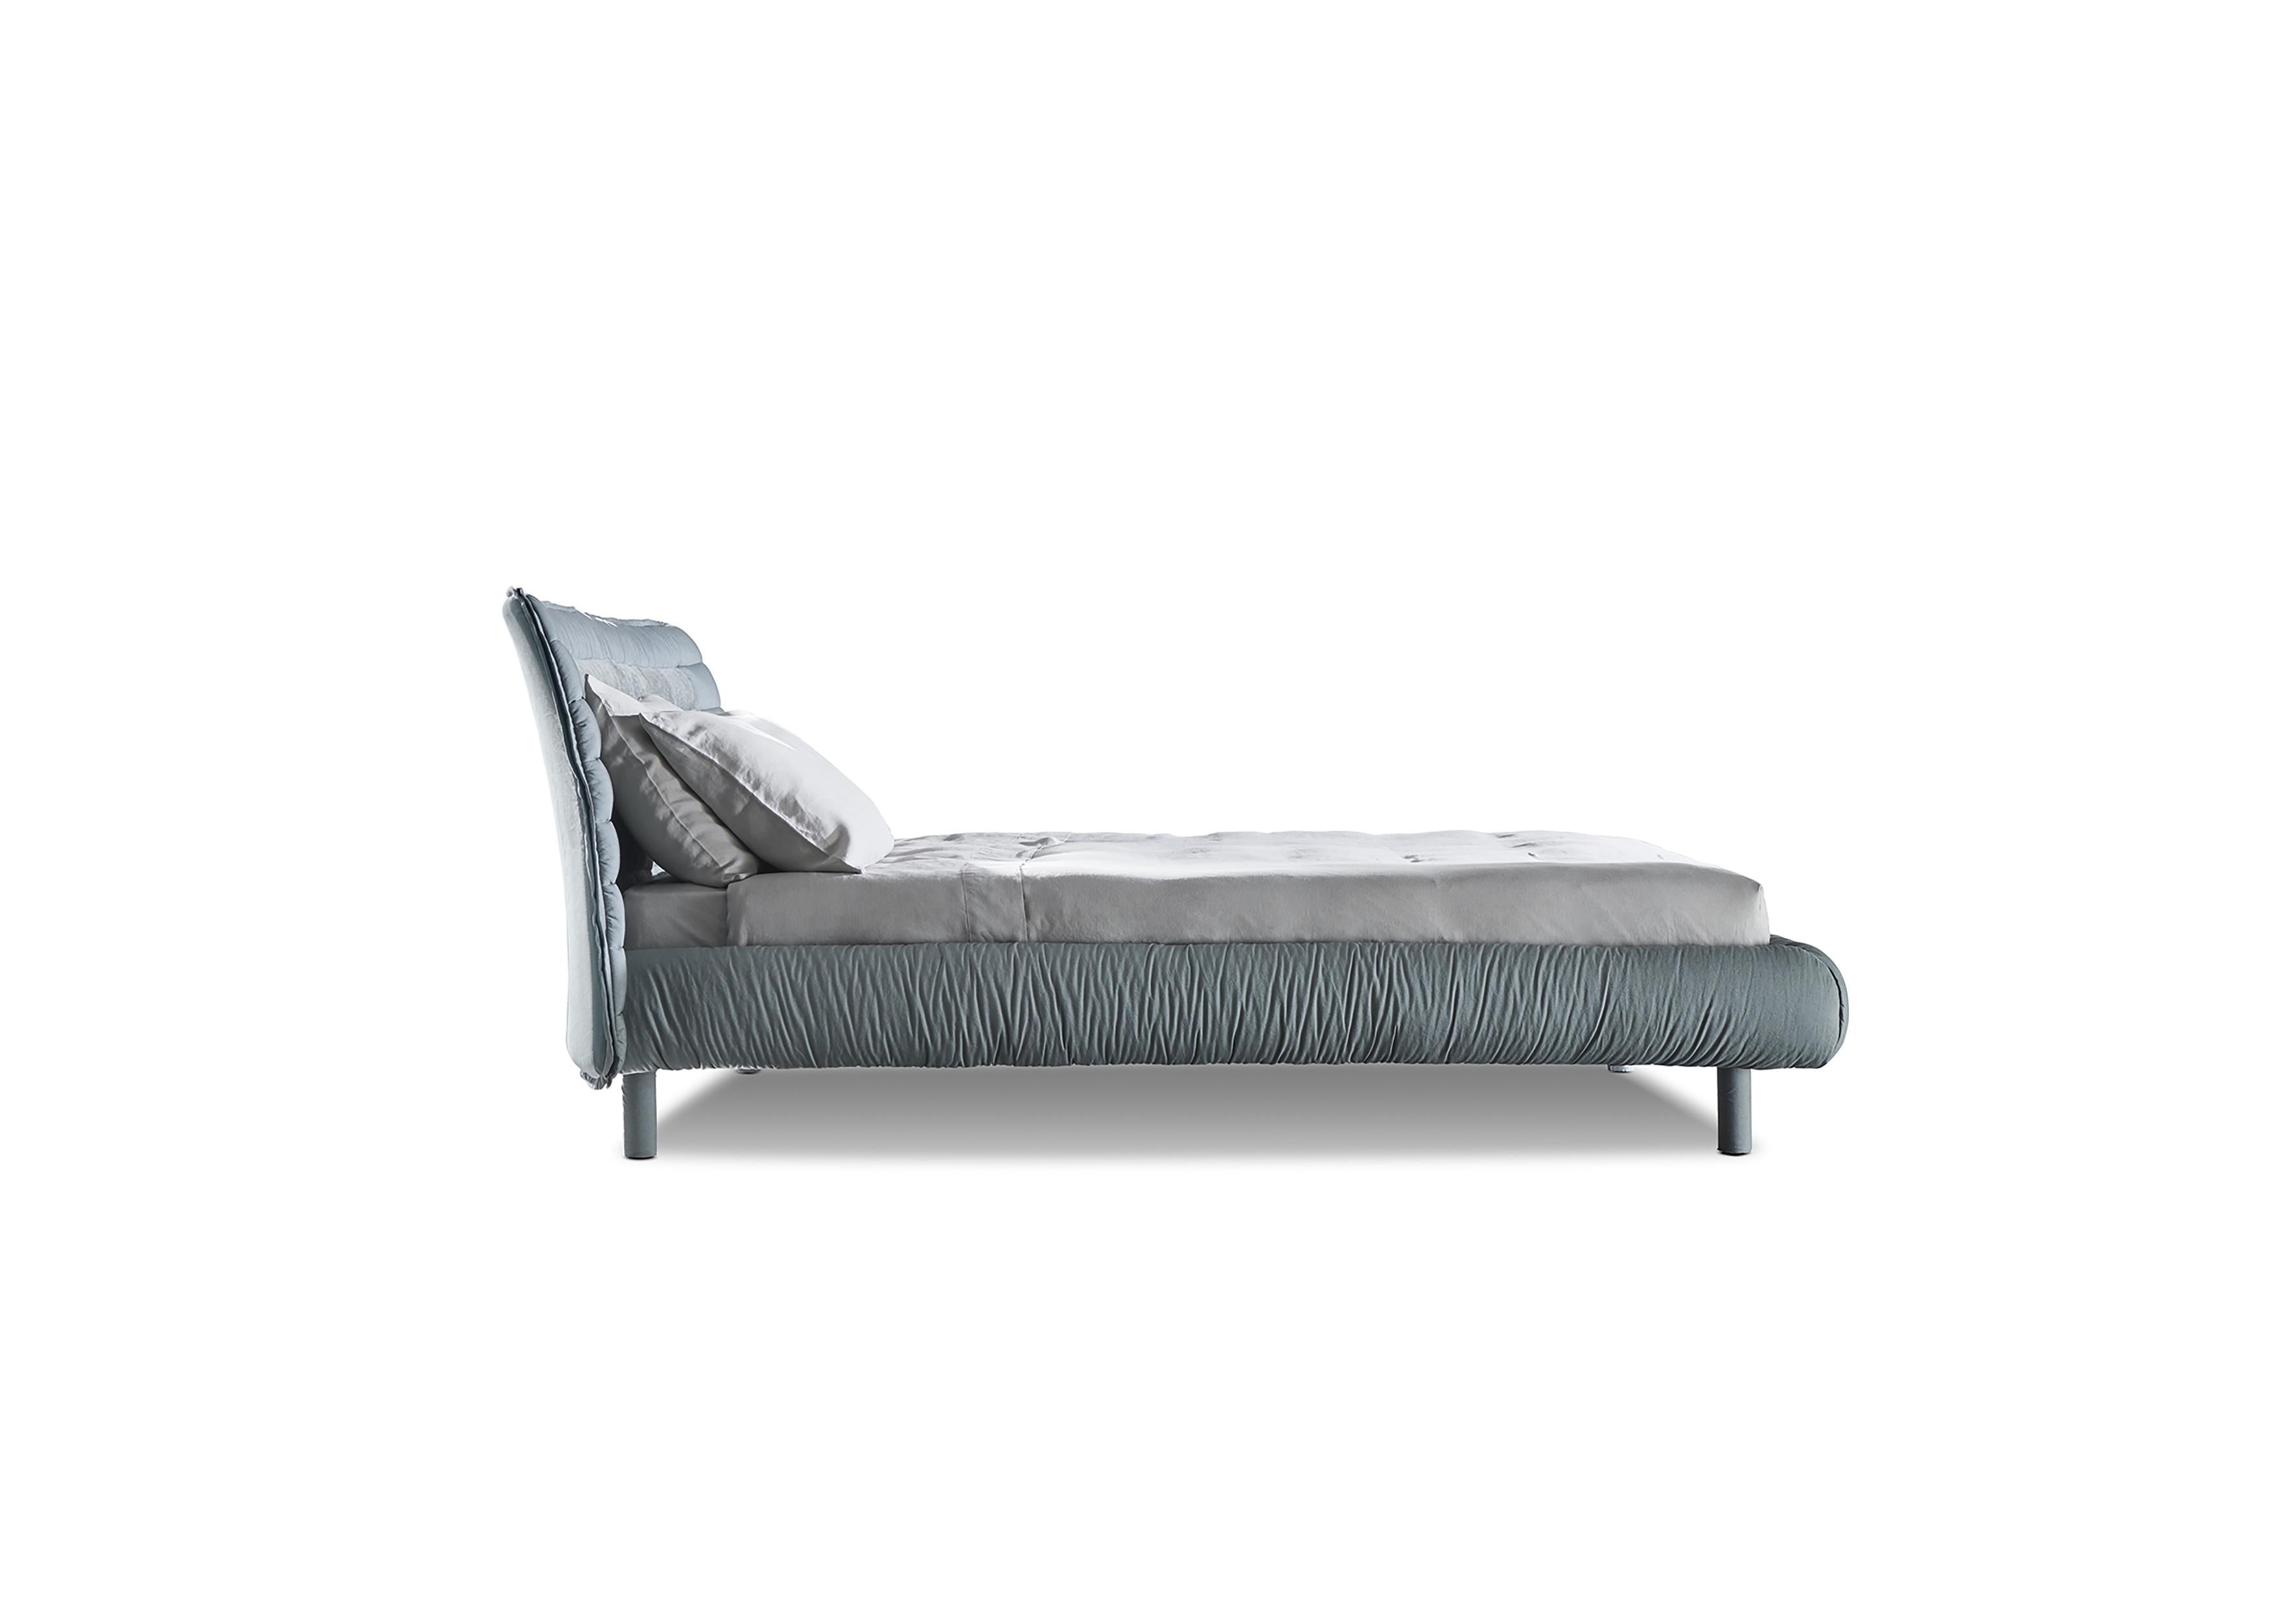 Surrounded by an enveloping padded frame, the Plumeau bed reveals its essence in soft, sinuous shapes that call to mind the textile world. Created from the desire to reinterpret night-time wellness in a contemporary key through a narration inspired